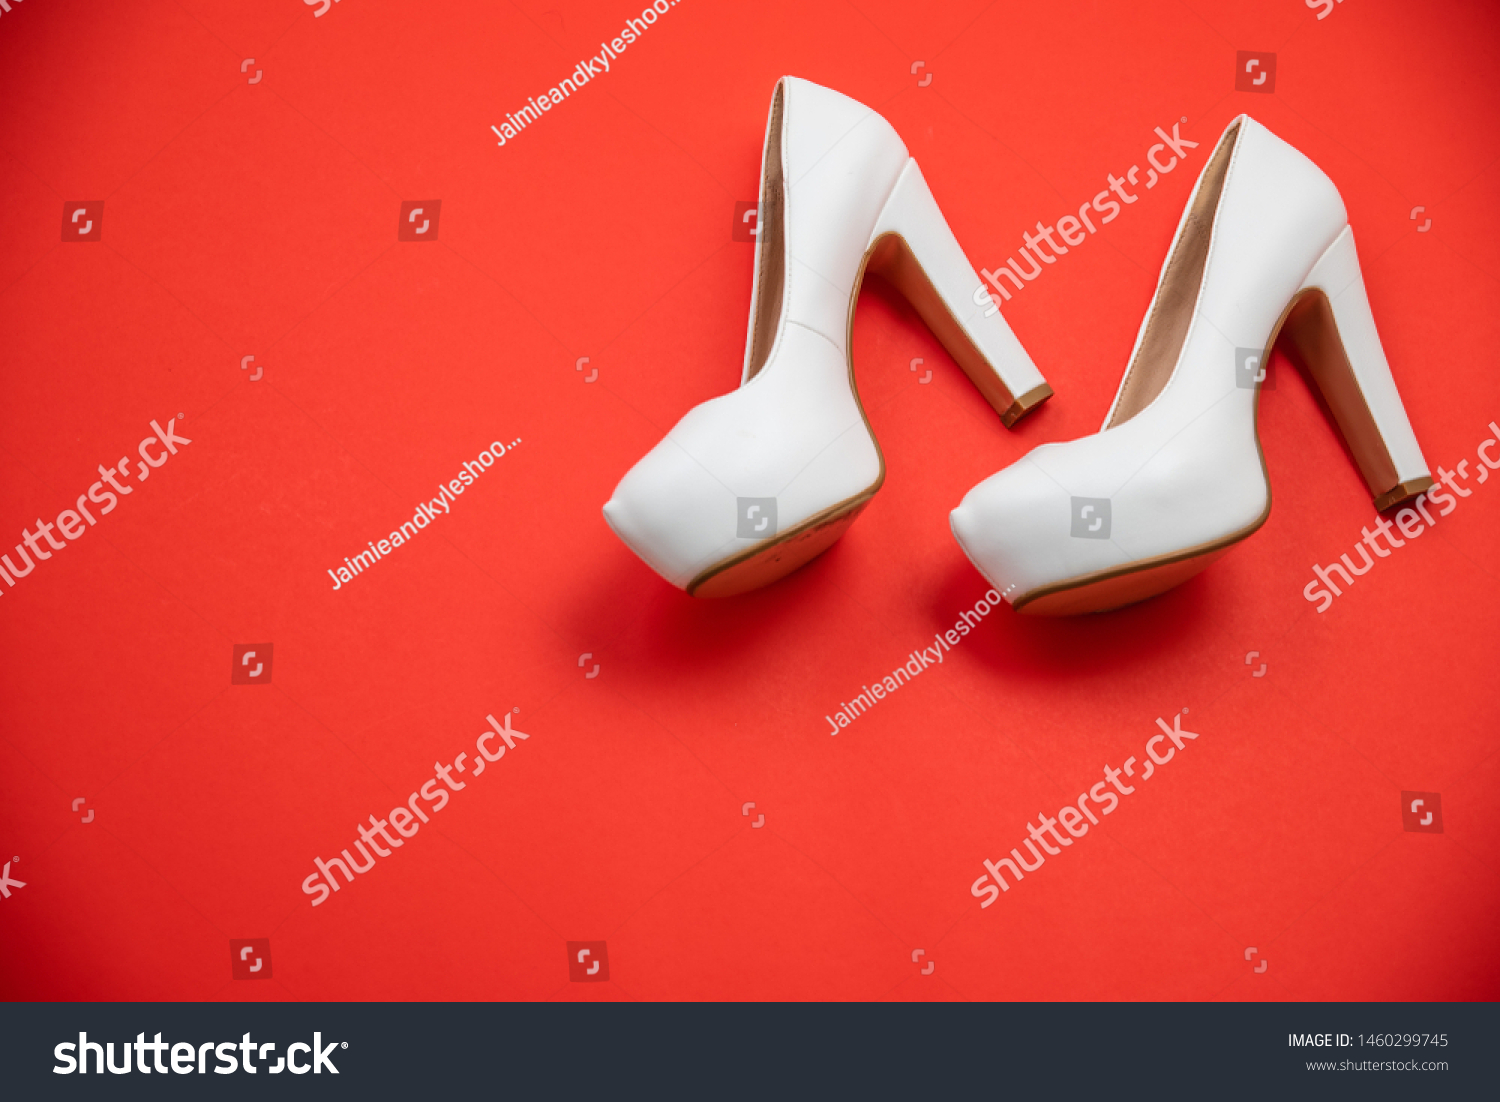 White high heeled shoes on red background - top view concept - blank empty room space for text or copy. Suitable for holidays like Valentine's or Christmas. Classic fashion. Heels walking left #1460299745